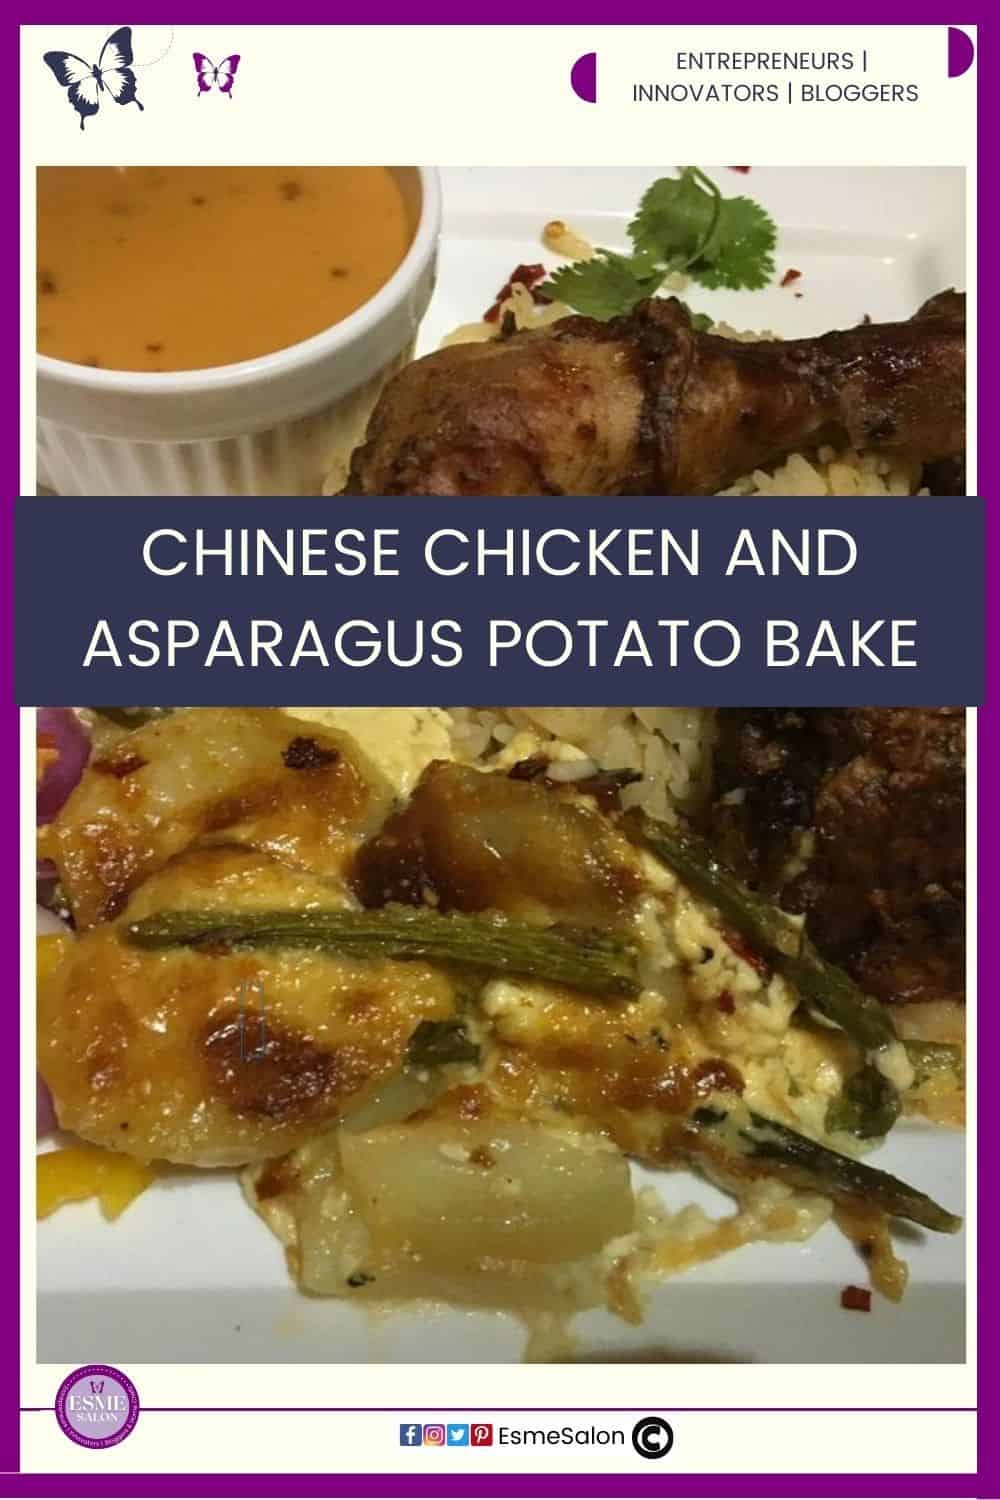 an image of Air fried Chinese Chicken and Asparagus Potato Bake